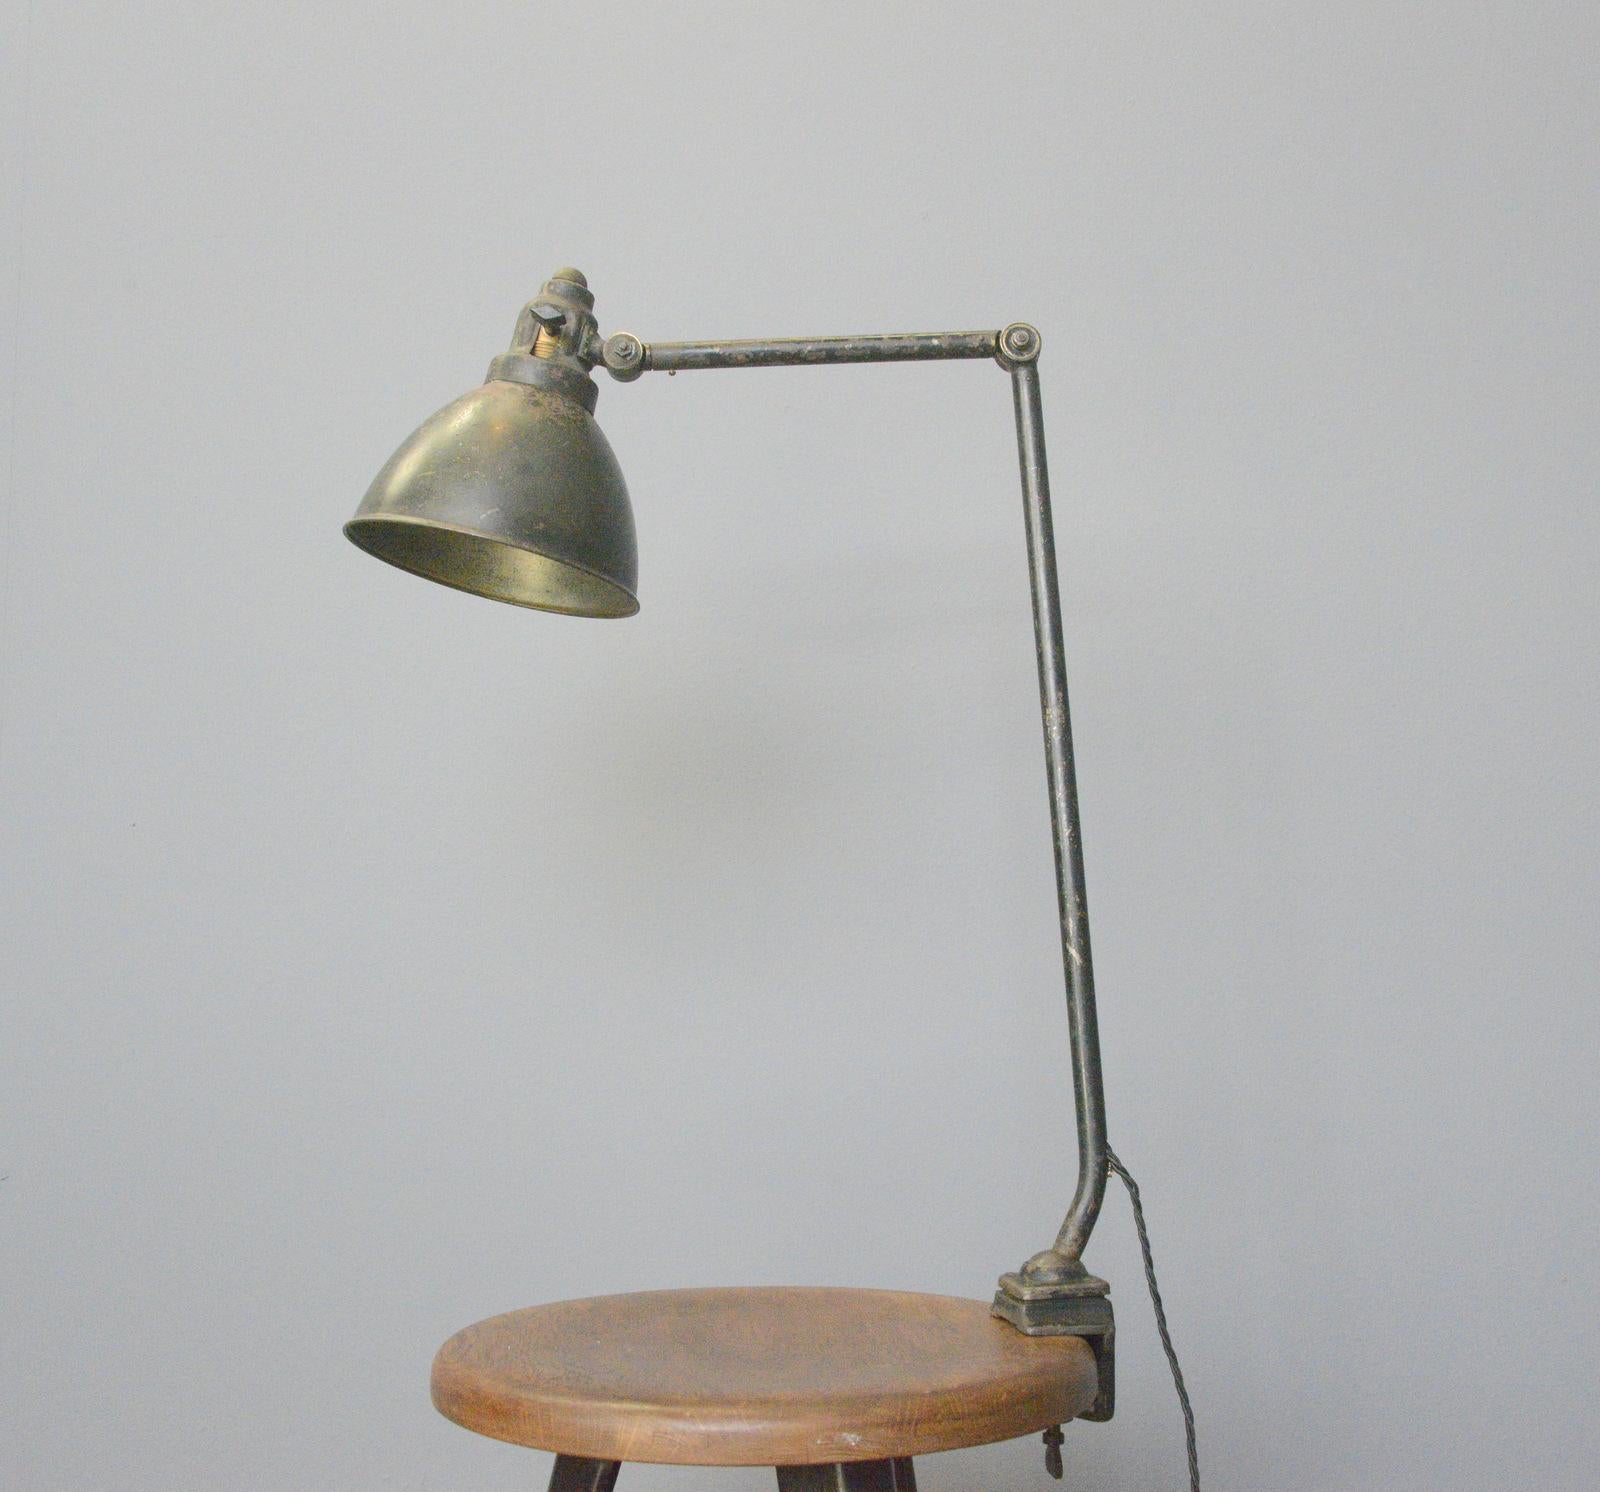 Model 574 Kandem desk lamp Circa 1920s

- Original dark green paint
- Pressed steel shade with Kandem branding
- Articulated arm and shade
- On/off switch on the shade
- Produced by Korting and Mathiesen, Leipzig
- Model 574
- German ~